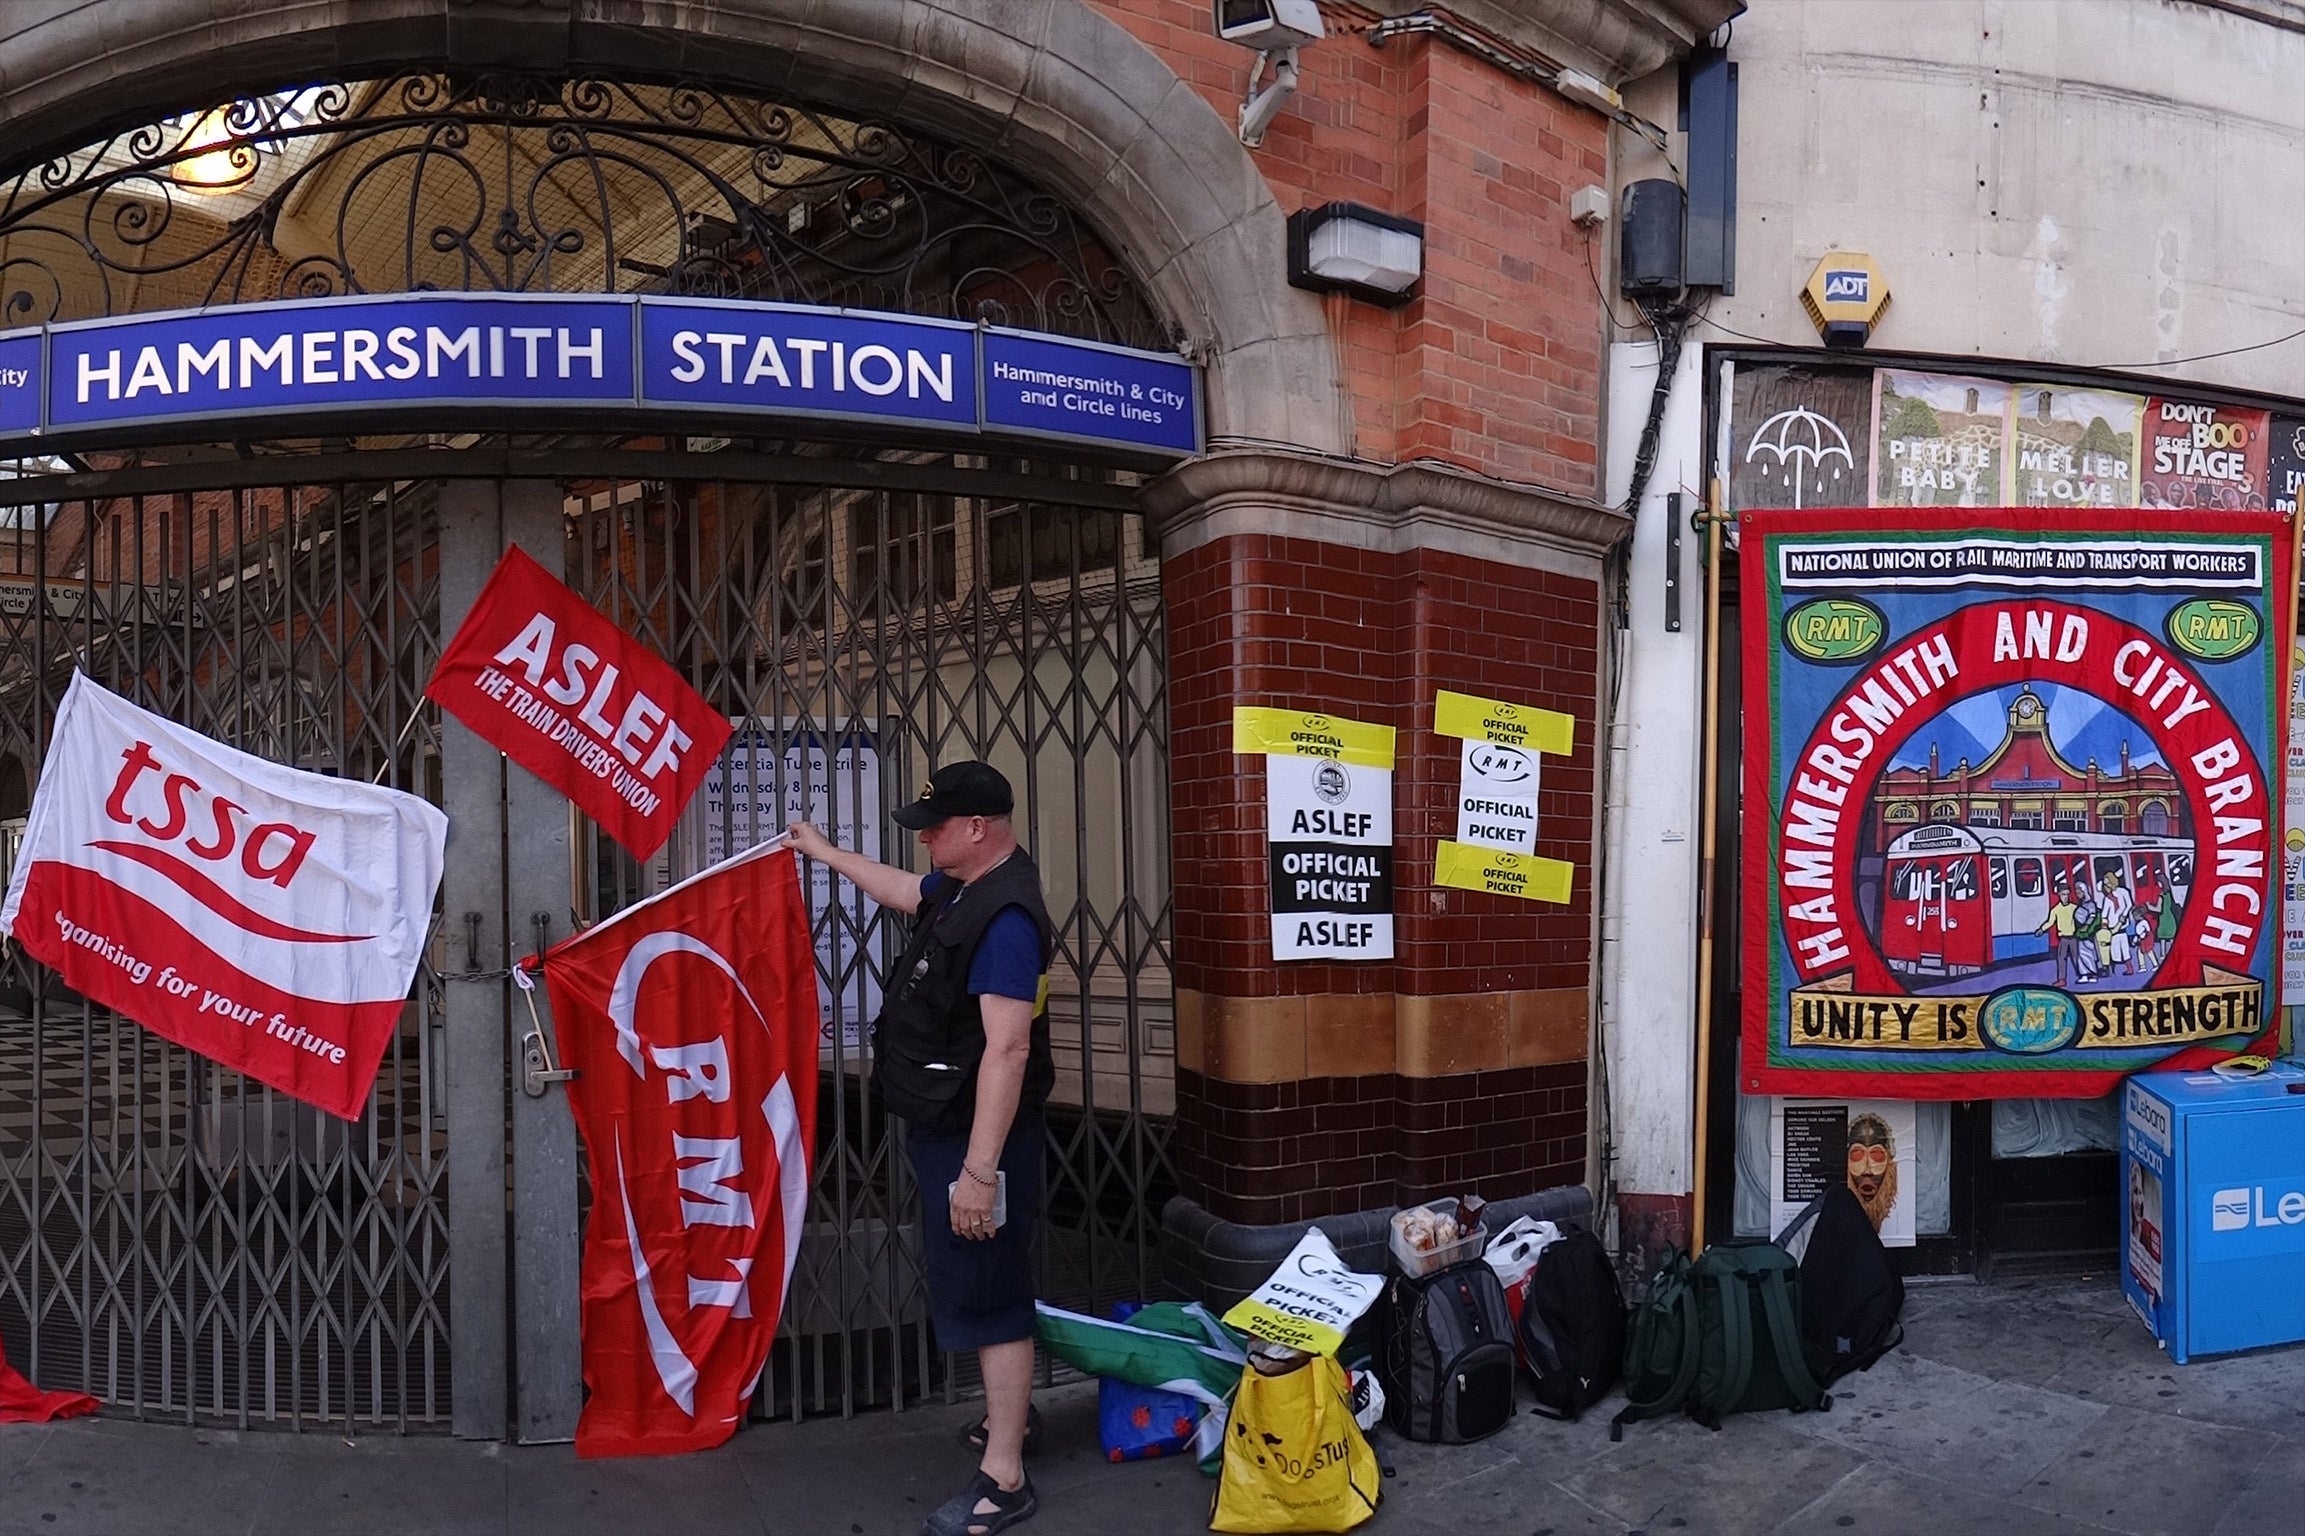 The proposed new law on ballot support would have kept some of London Underground open in the most recent strike